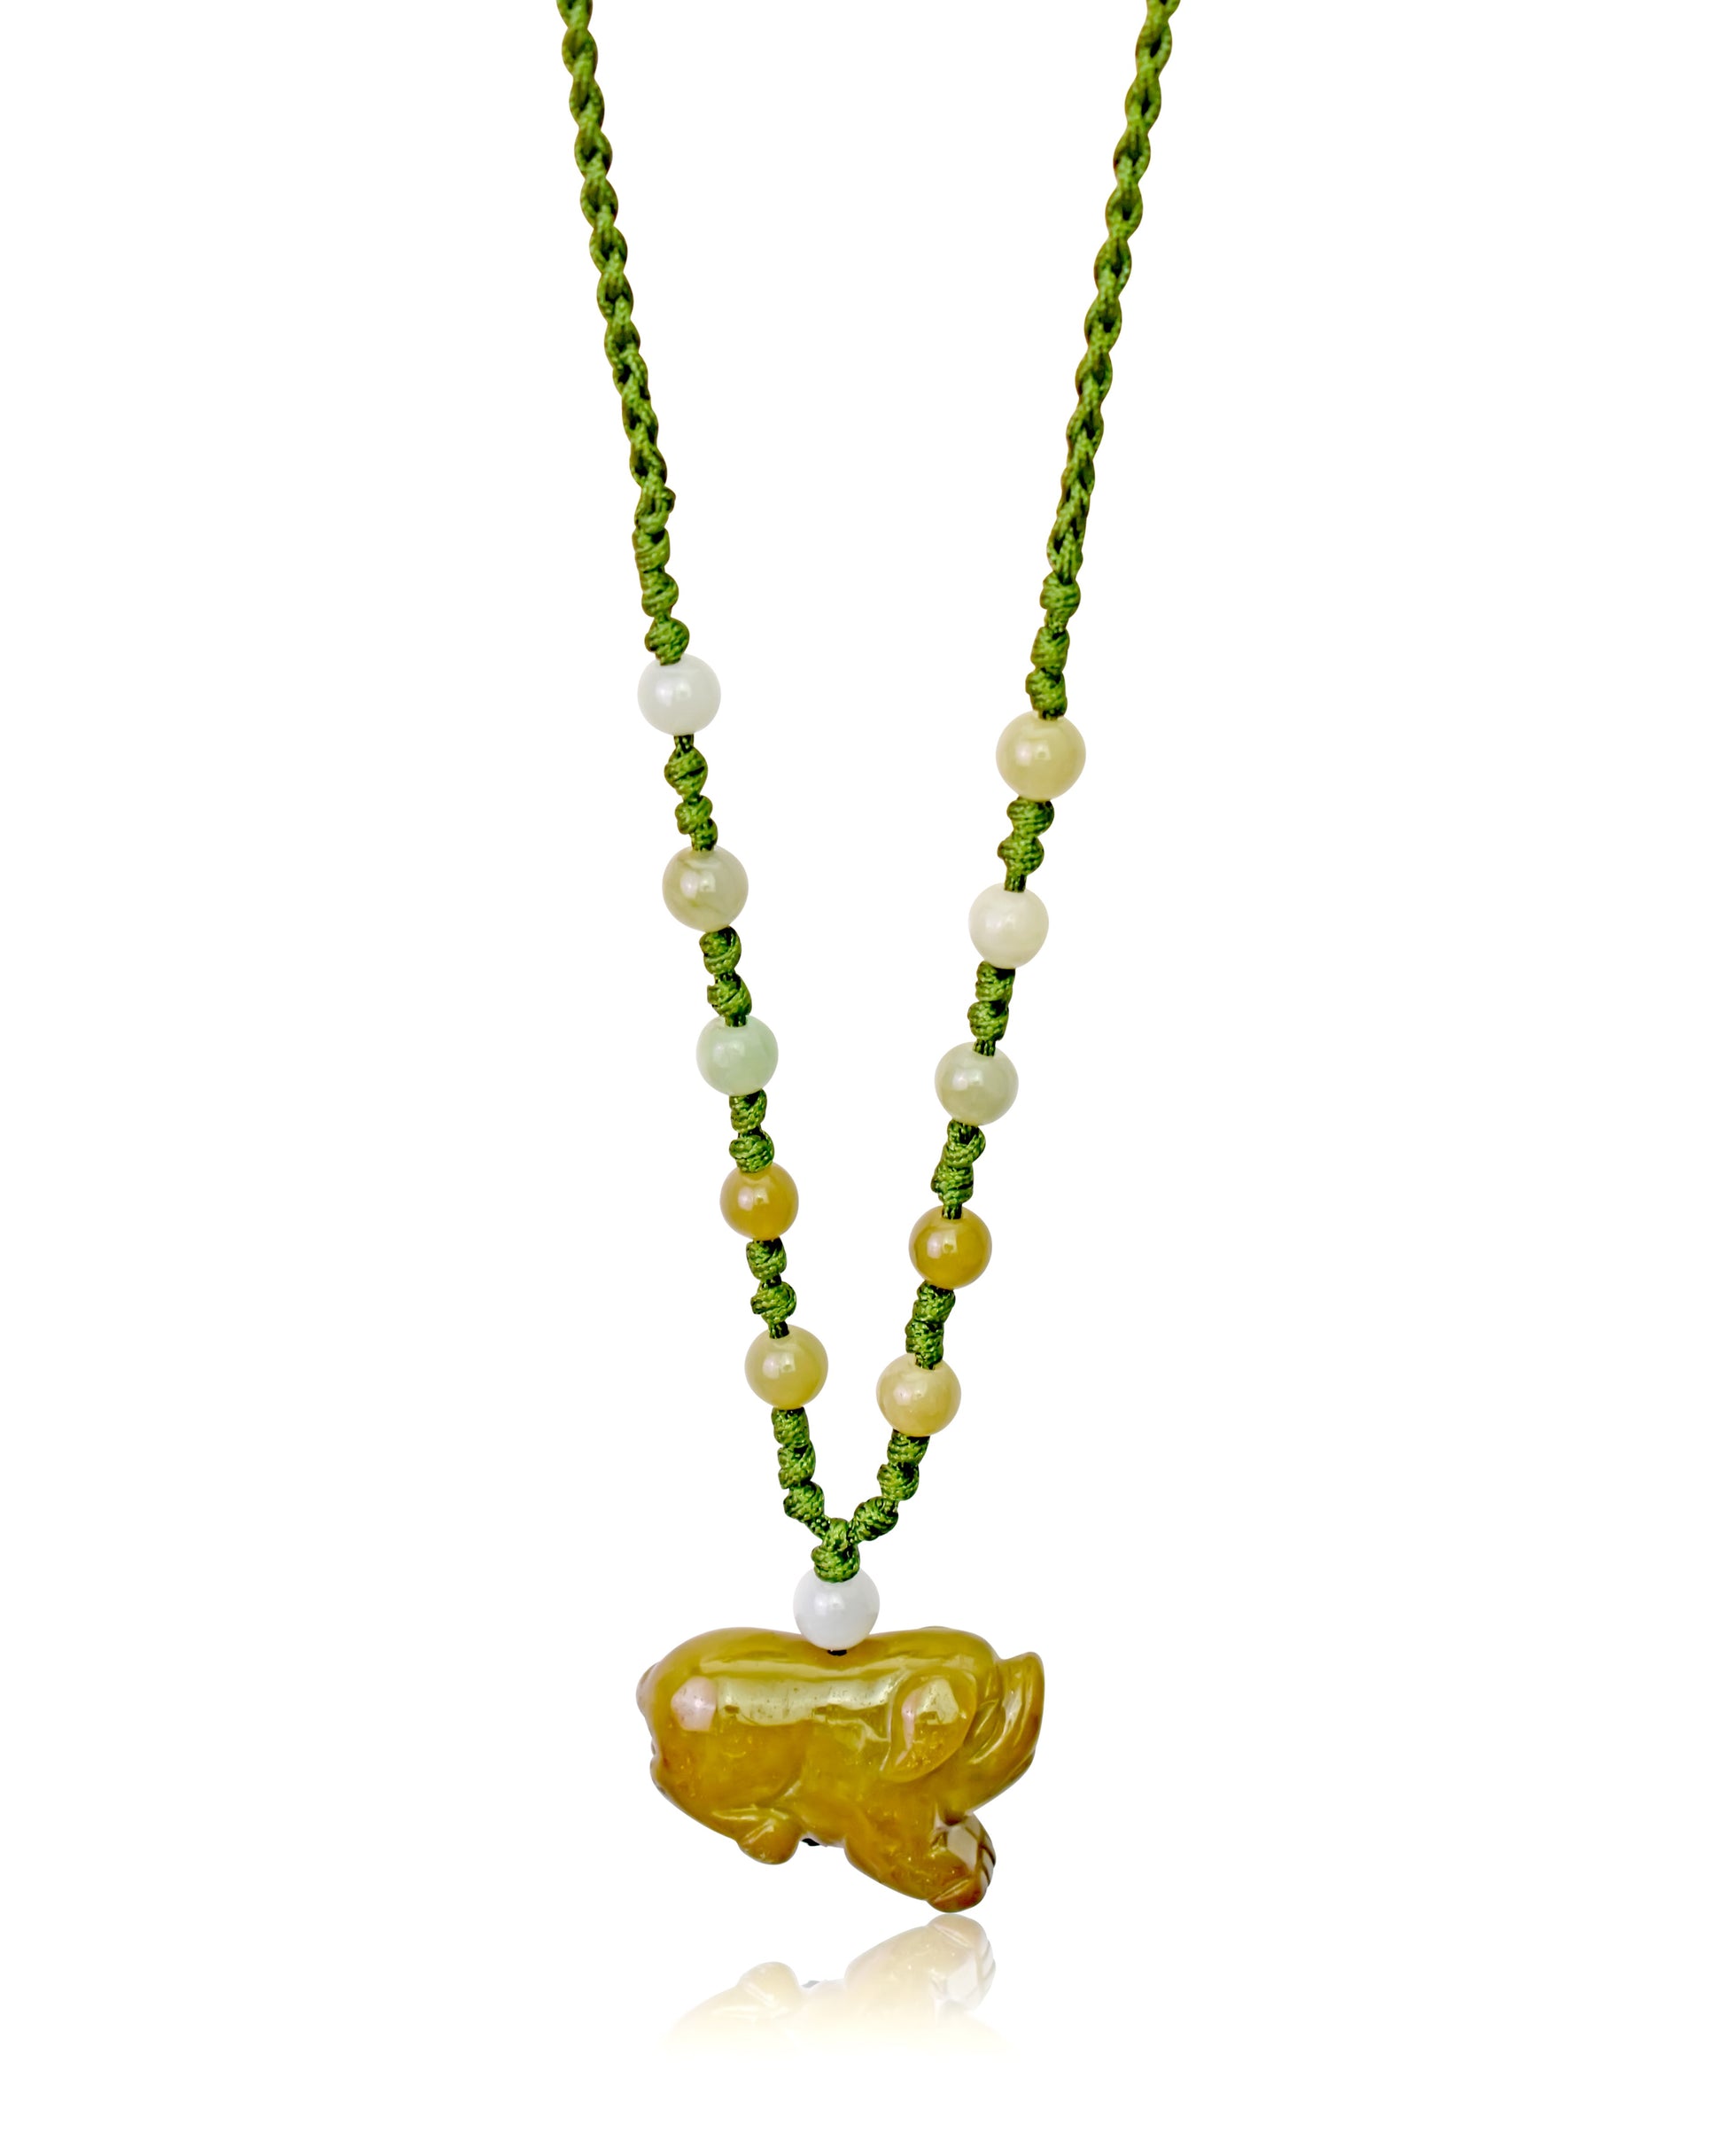 Show Off Your Boar Pride with a Handmade Jade Necklace